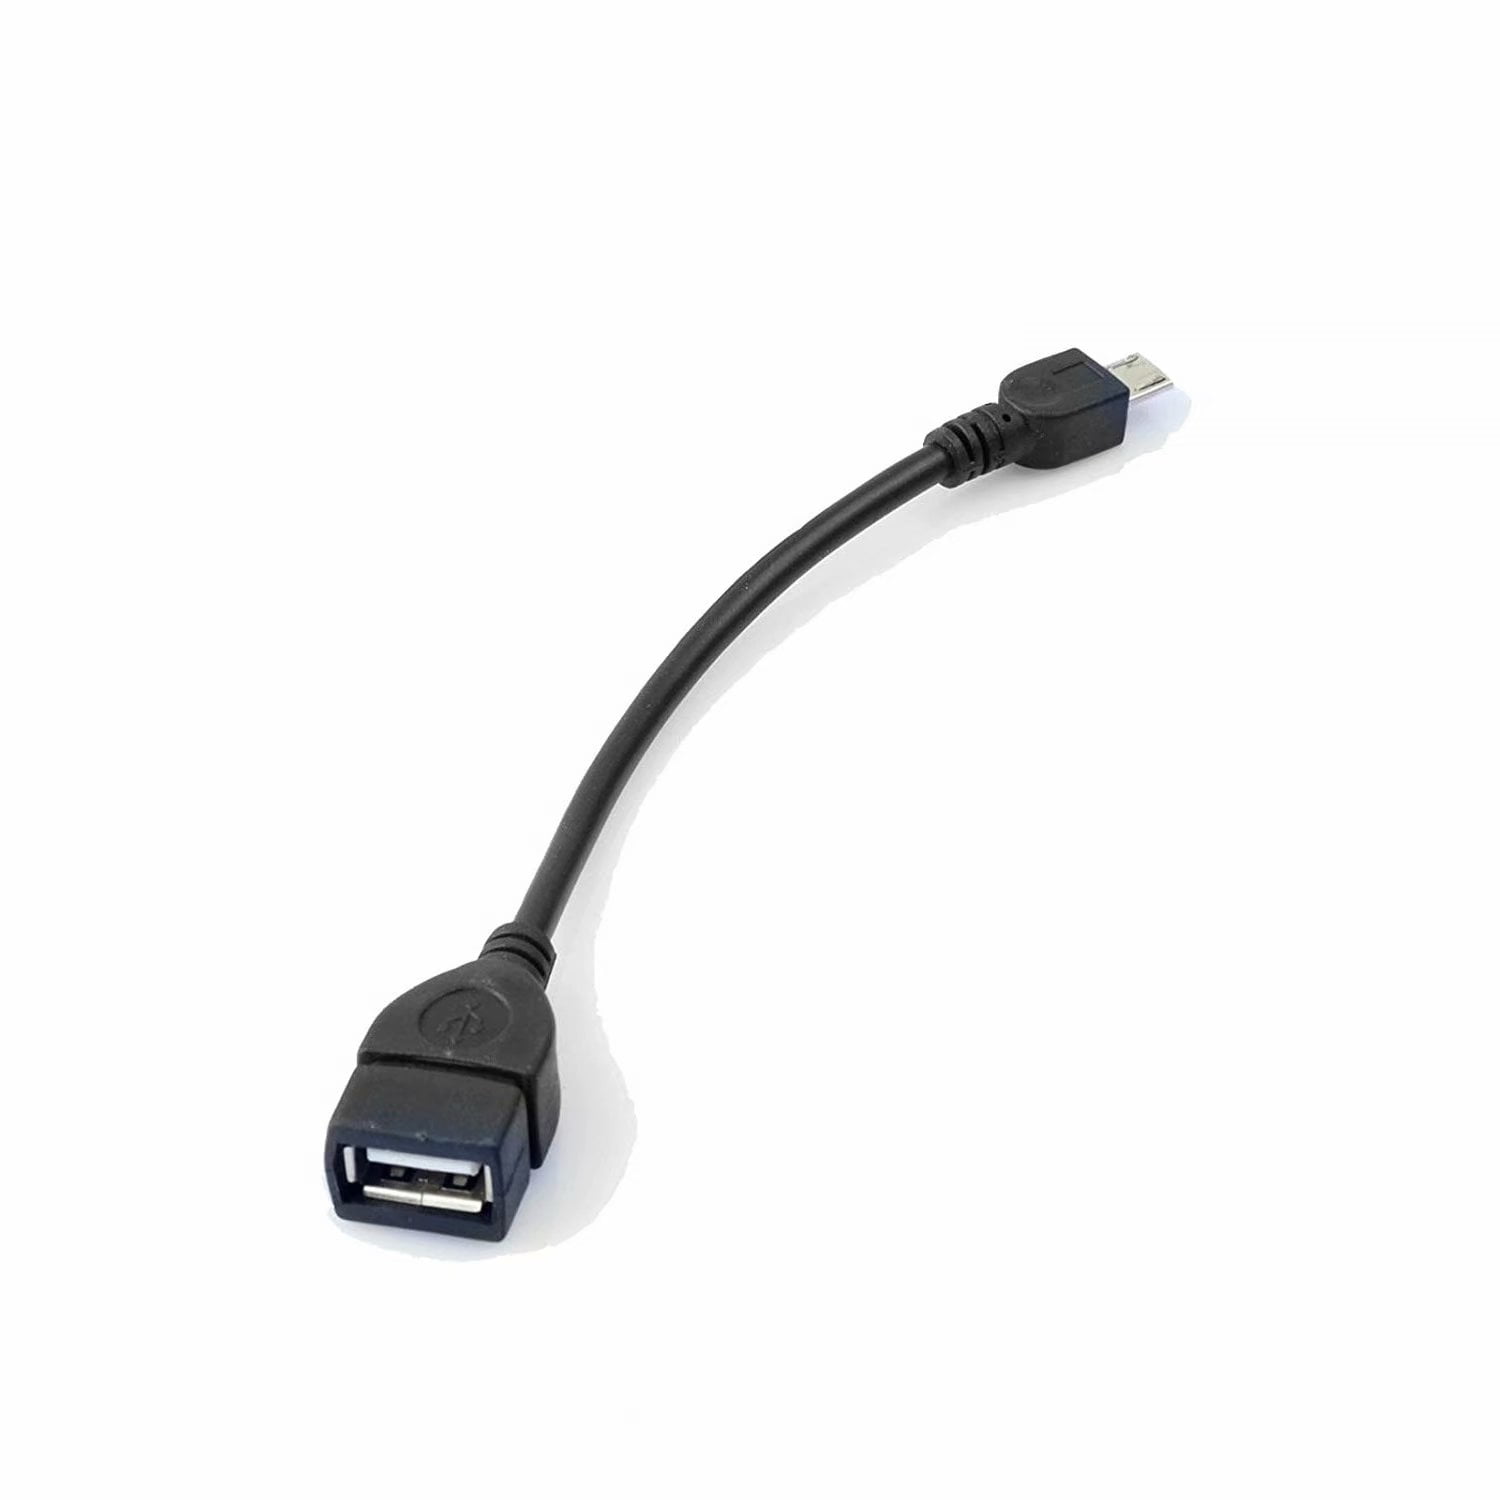 Mini USB OTG Cable for Digital Cameras - USB to Mini USB B 5 Pin Male Adapter Cable（1 Pack) - Walmart.com